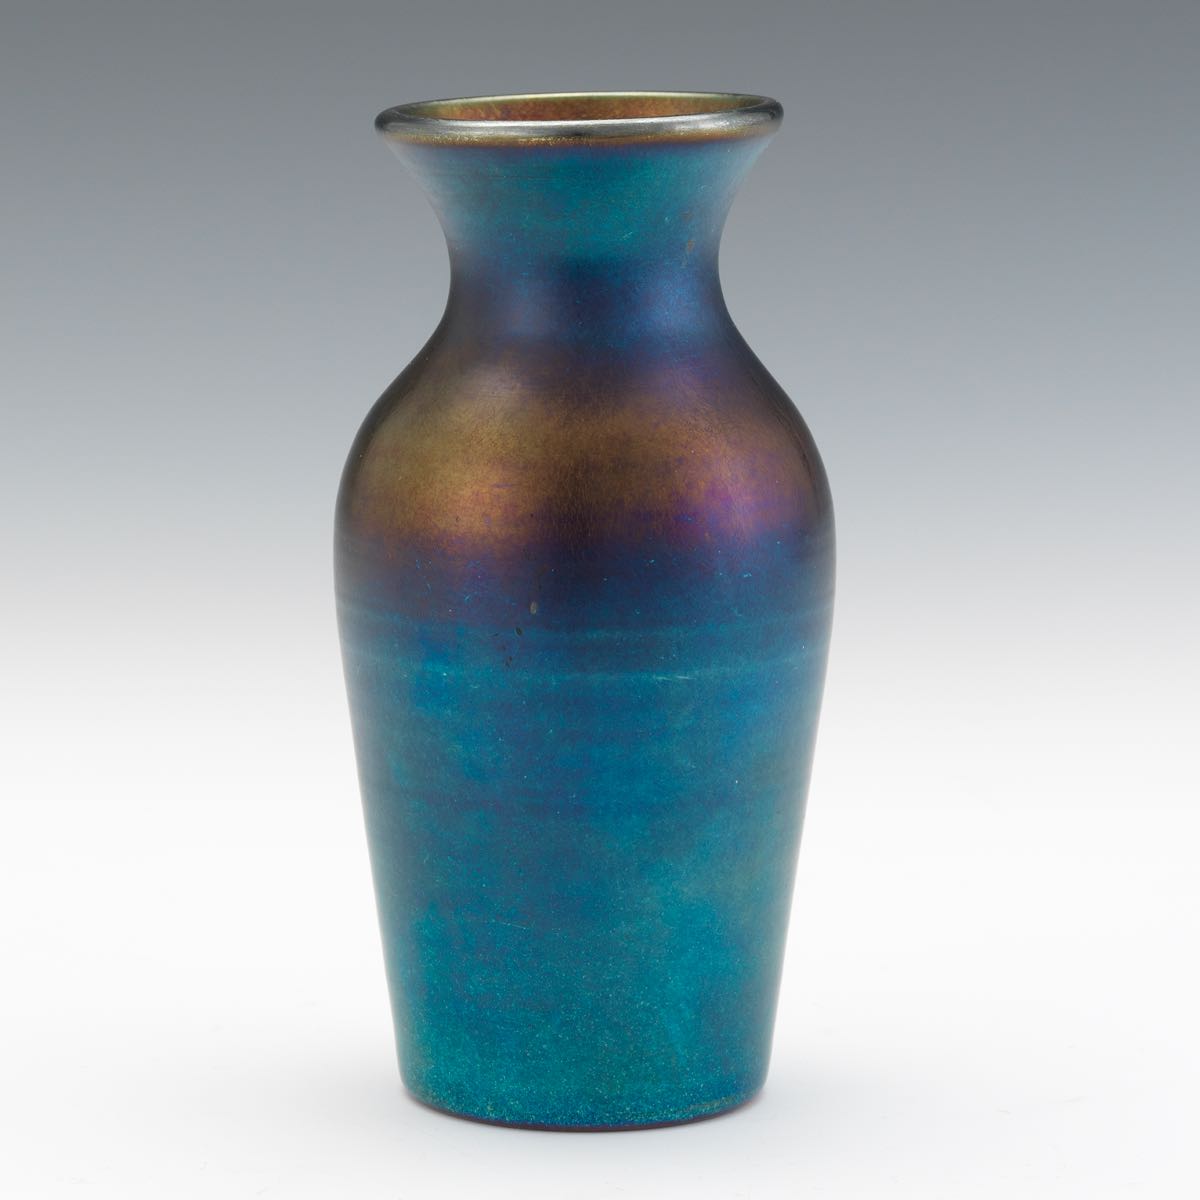 Signed Quezal Iridescent Glass Vase 6 1/2" TBeautiful blue glass vase with hints of green gold. - Image 4 of 7